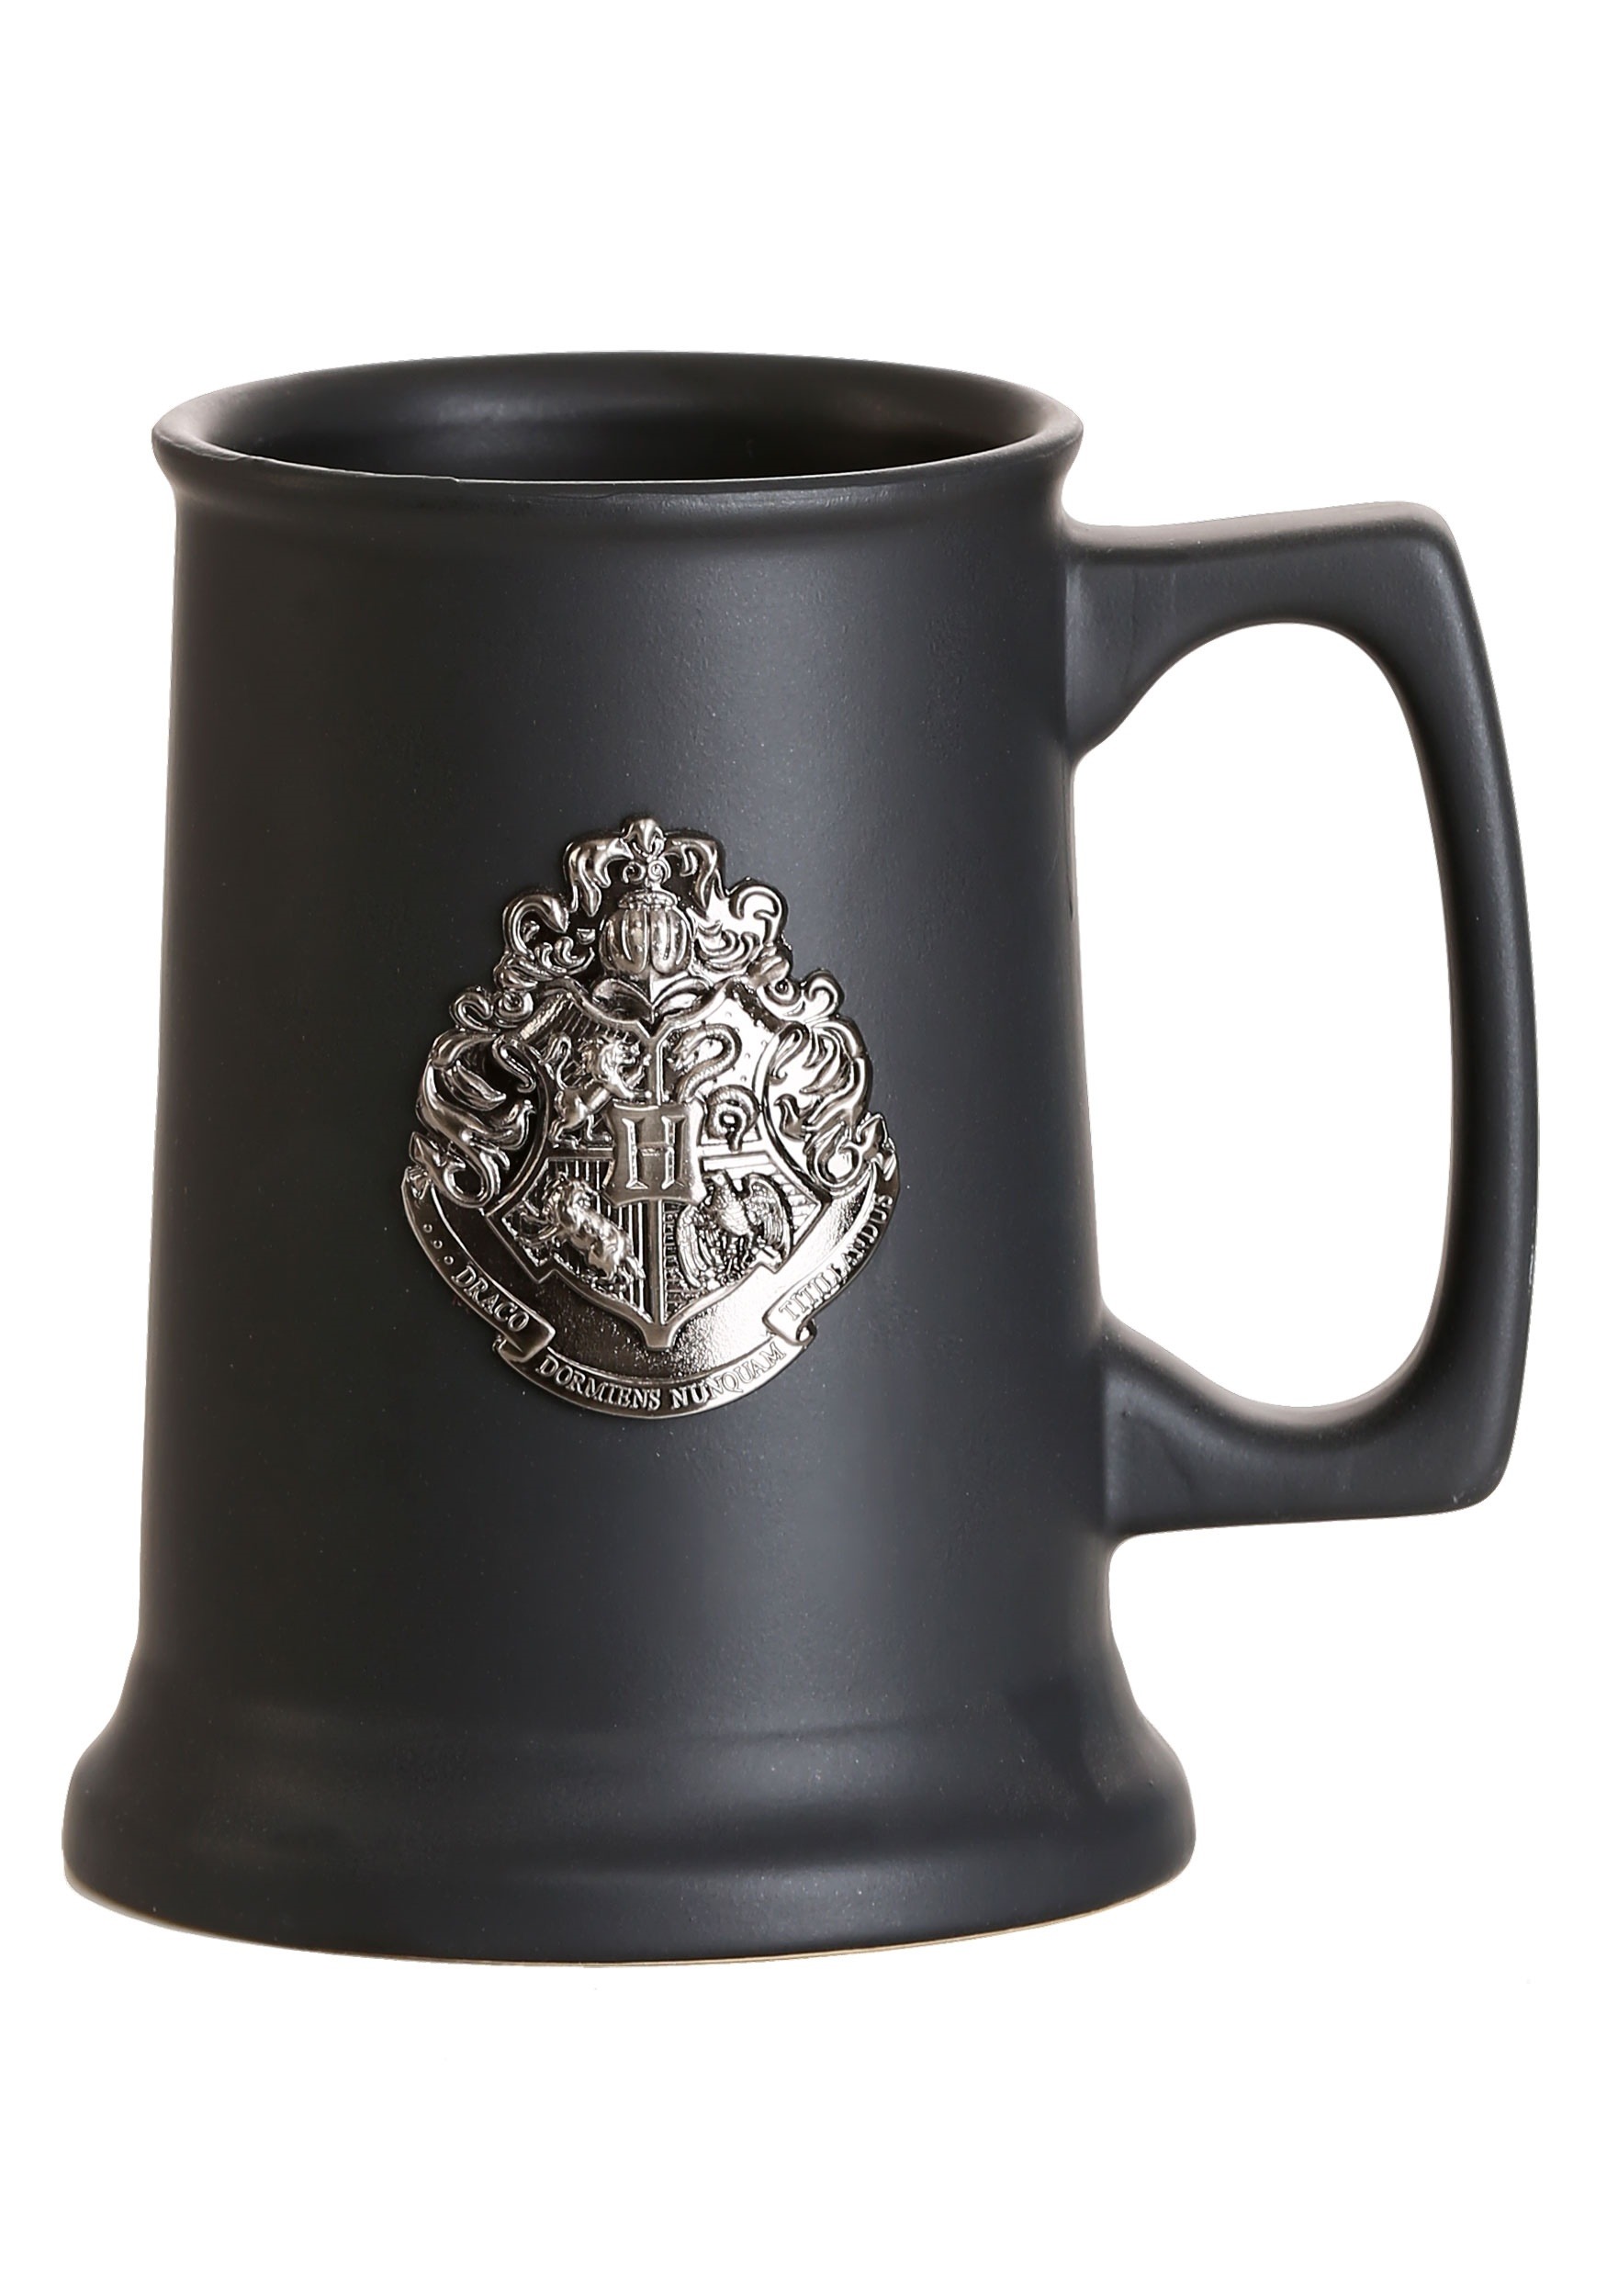 Harry Potter Black Cauldron Ceramic Soup Mug with Spoon and Set of 4 Collectible Crest Buttons 